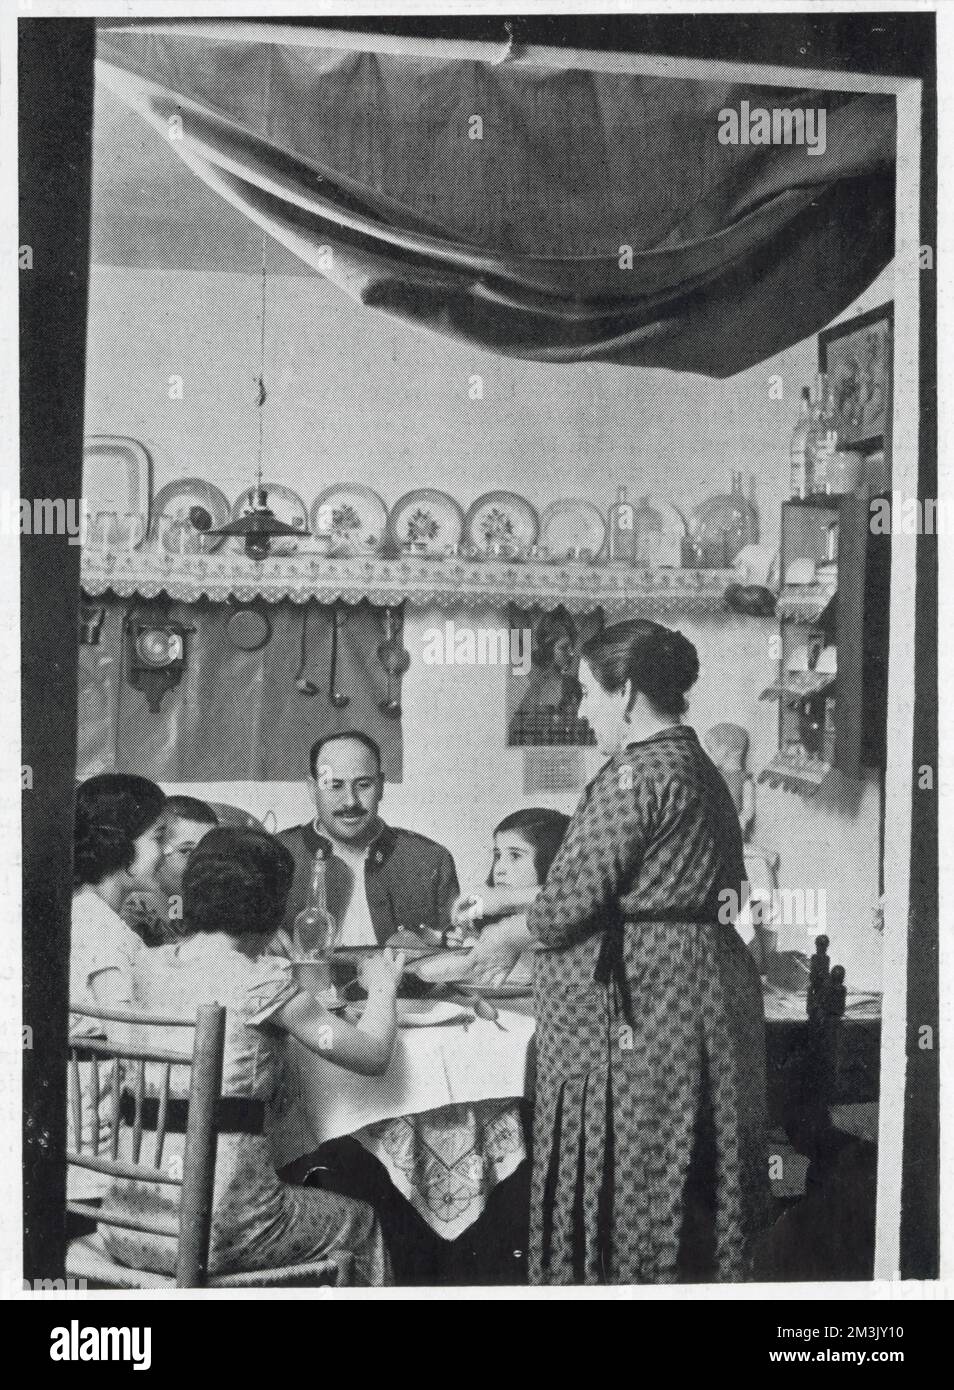 A Civil Guardsman having dinner with his family in their private rooms at a Civil Guard Barracks, Spain, 1936.   The Civil Guard were a cross between a military unit and a police force, who worked to maintain peace and order in Spain in both times of war and peace. The Civil Guard took an active role in the Spanish Civil War, with guardsmen serving both the Republicans and the Nationalists. Stock Photo